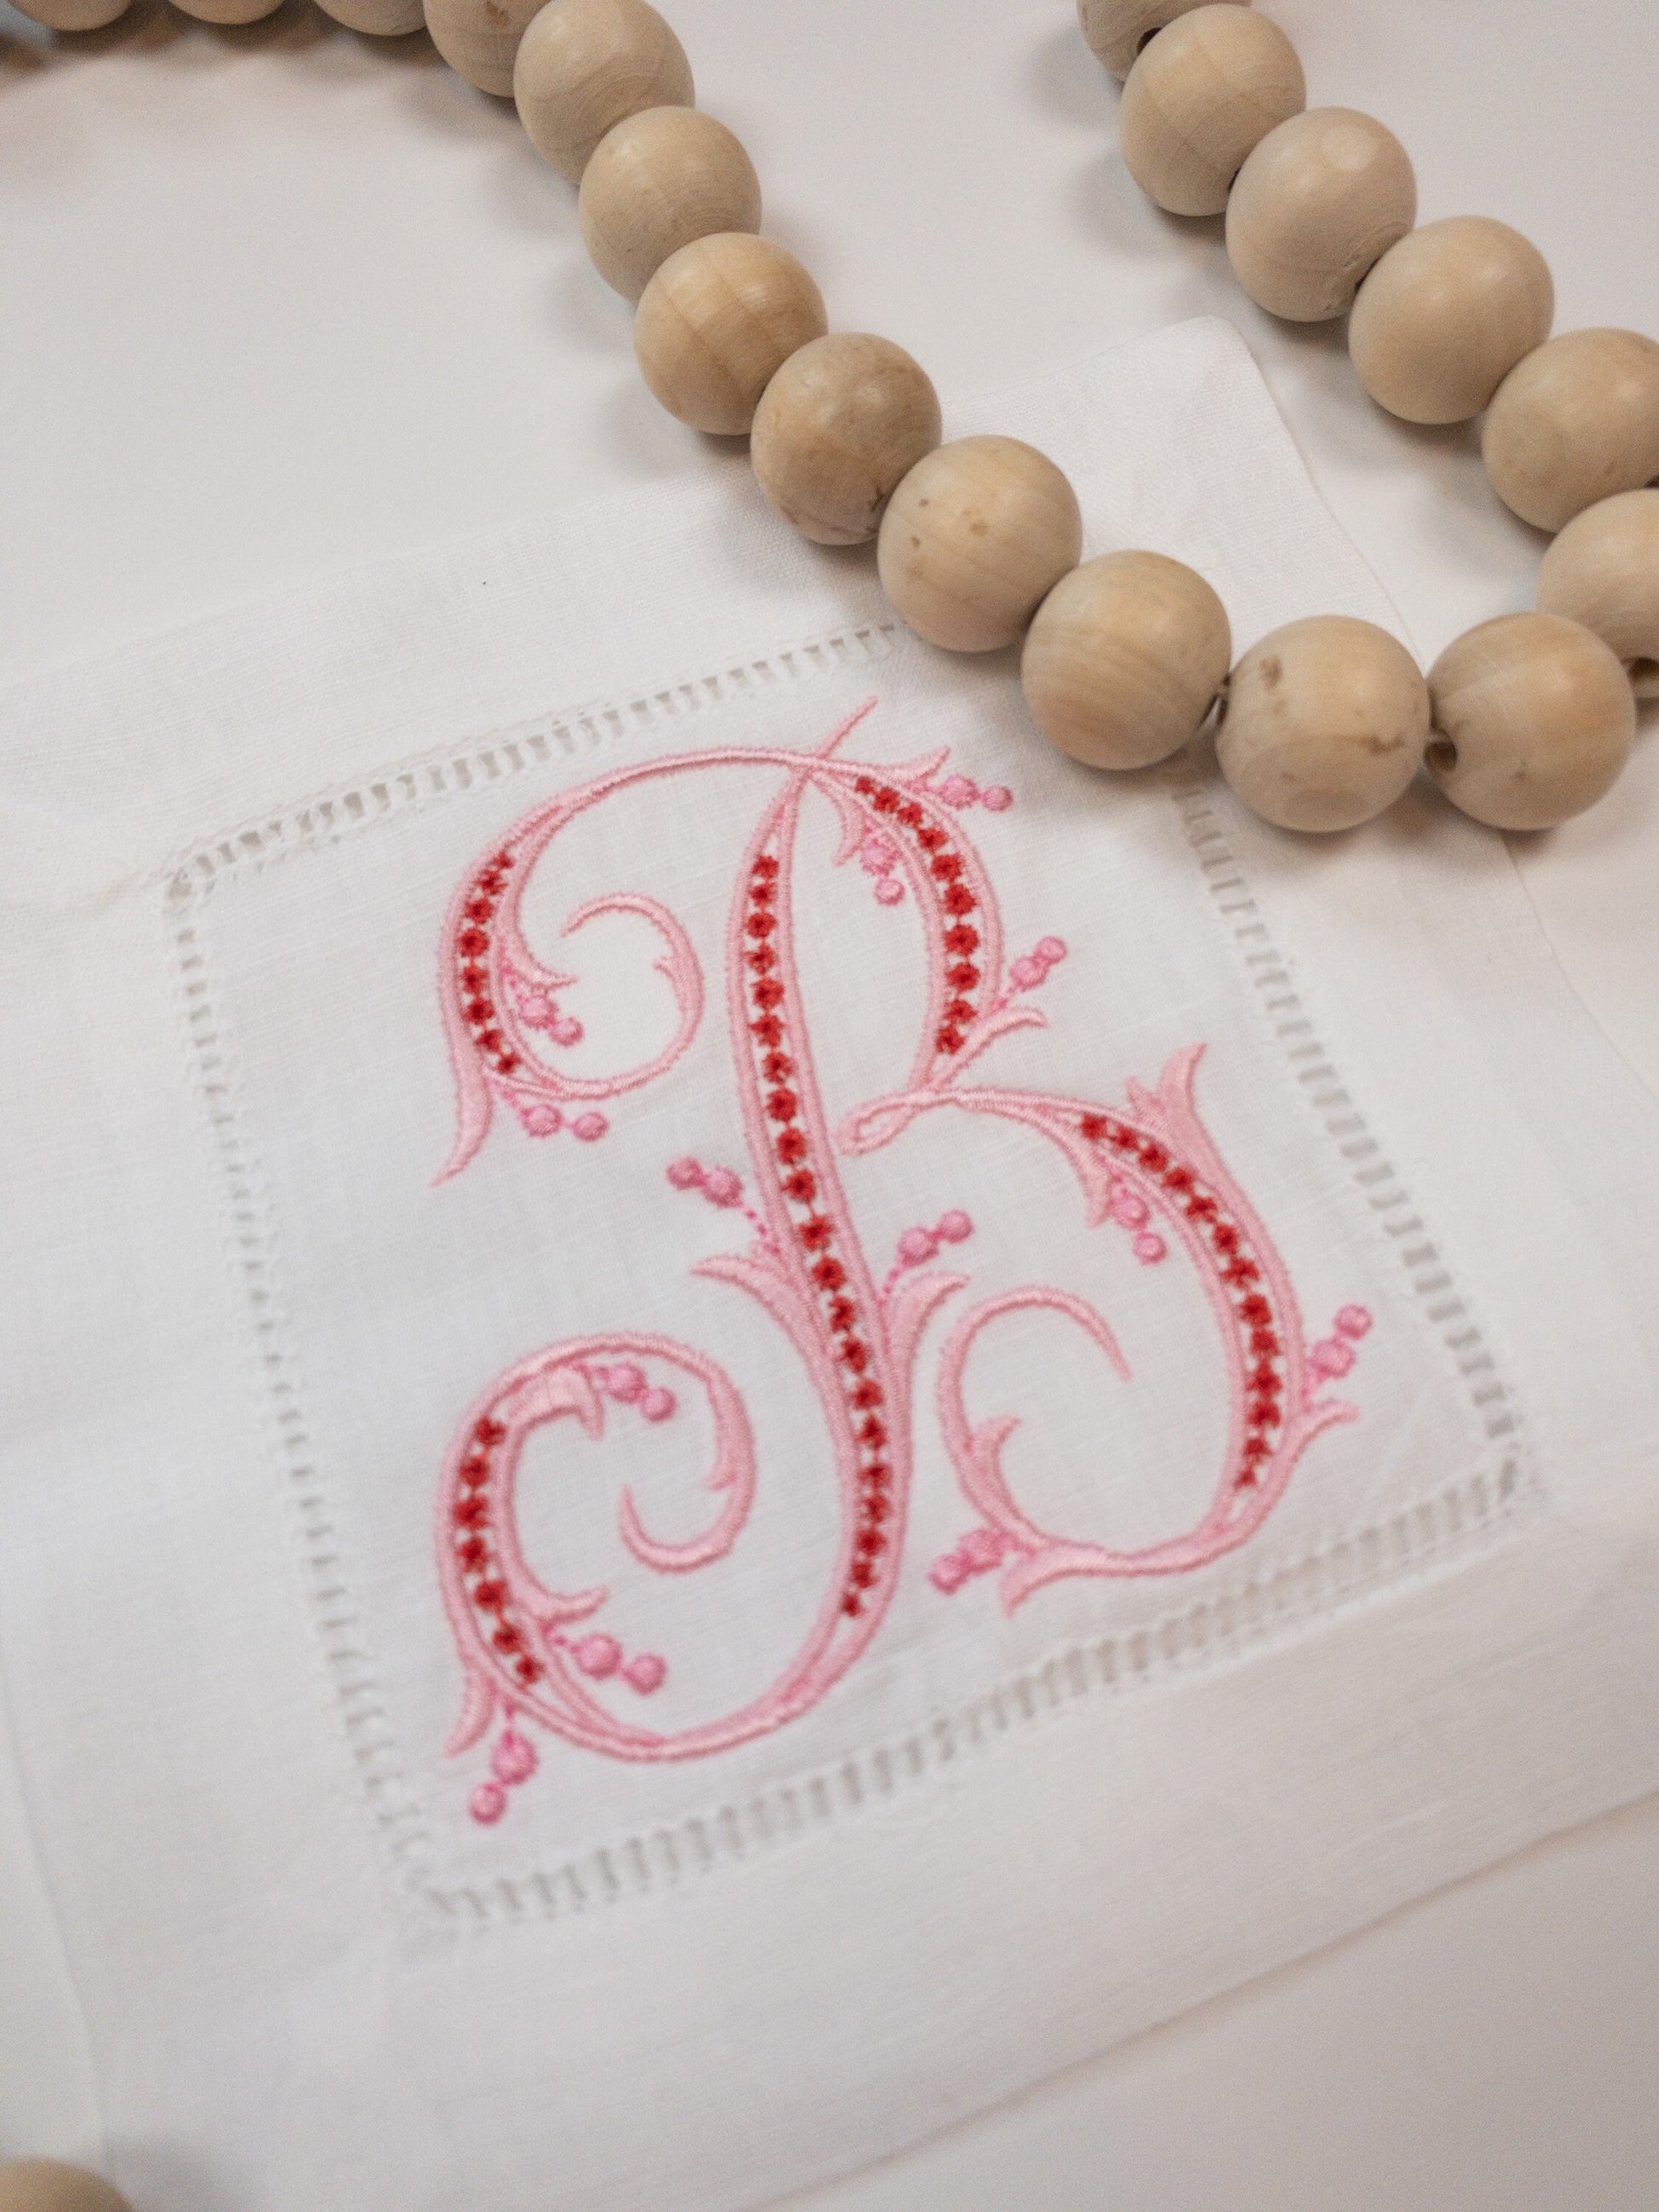 Fancy Monogramed Linen Cocktail Napkin, Multiple Colored Embroidered Cocktail Napkin